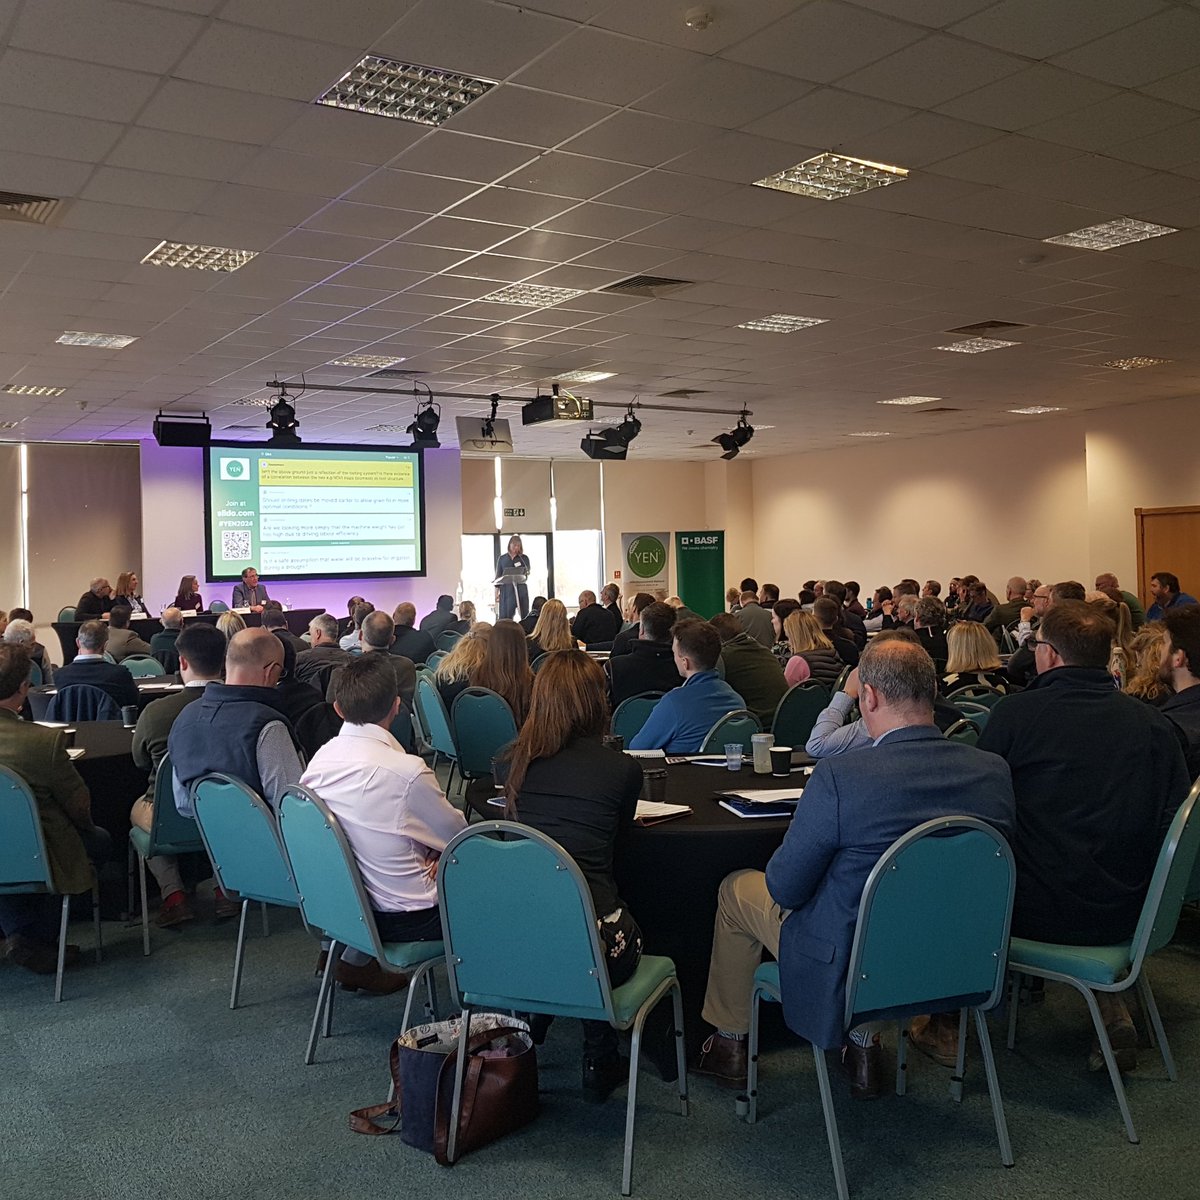 Great kick off so far at @adasYEN Conference. Looking forward to the rest of the day! @Rothamsted